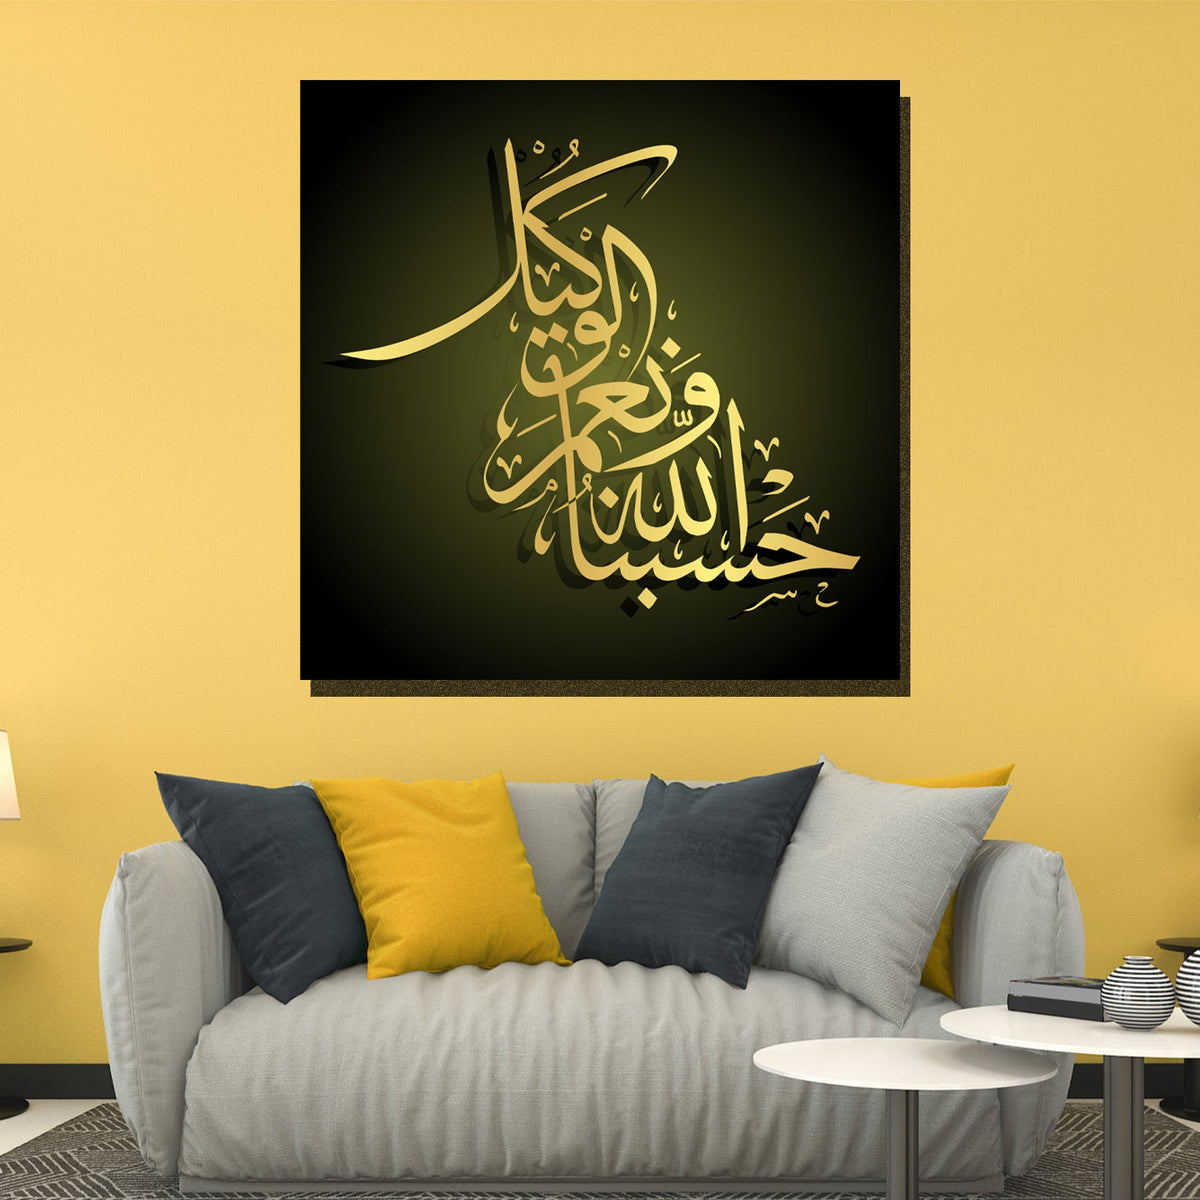 https://cdn.shopify.com/s/files/1/0387/9986/8044/products/IslamicArtLimitedEdition19CanvasArtprintStretched-2.jpg